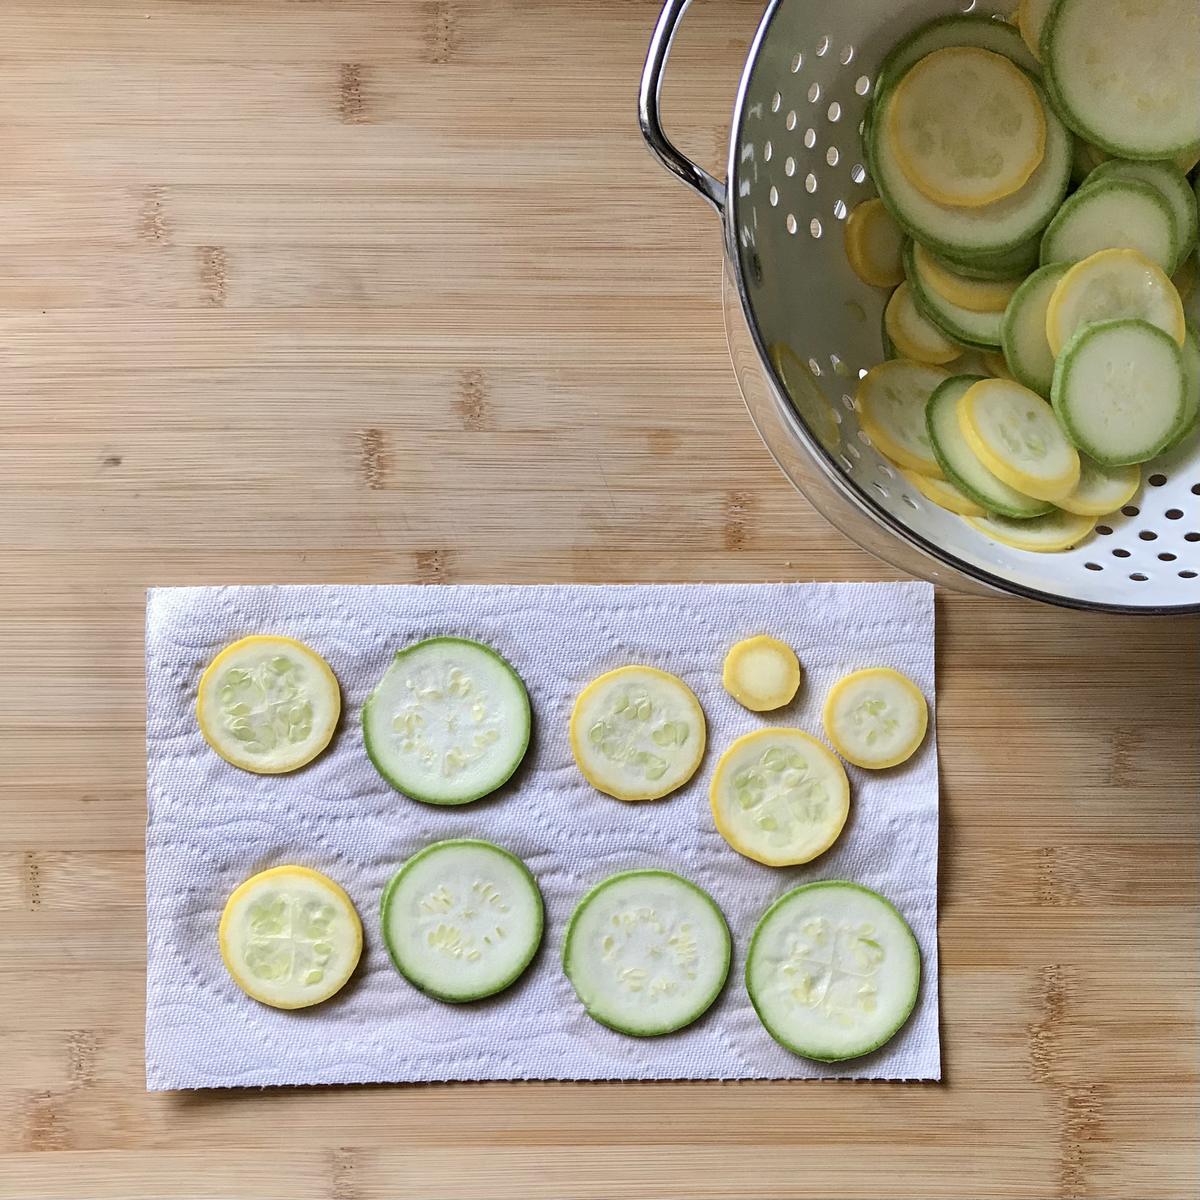 Sliced zucchini on a paper towel.